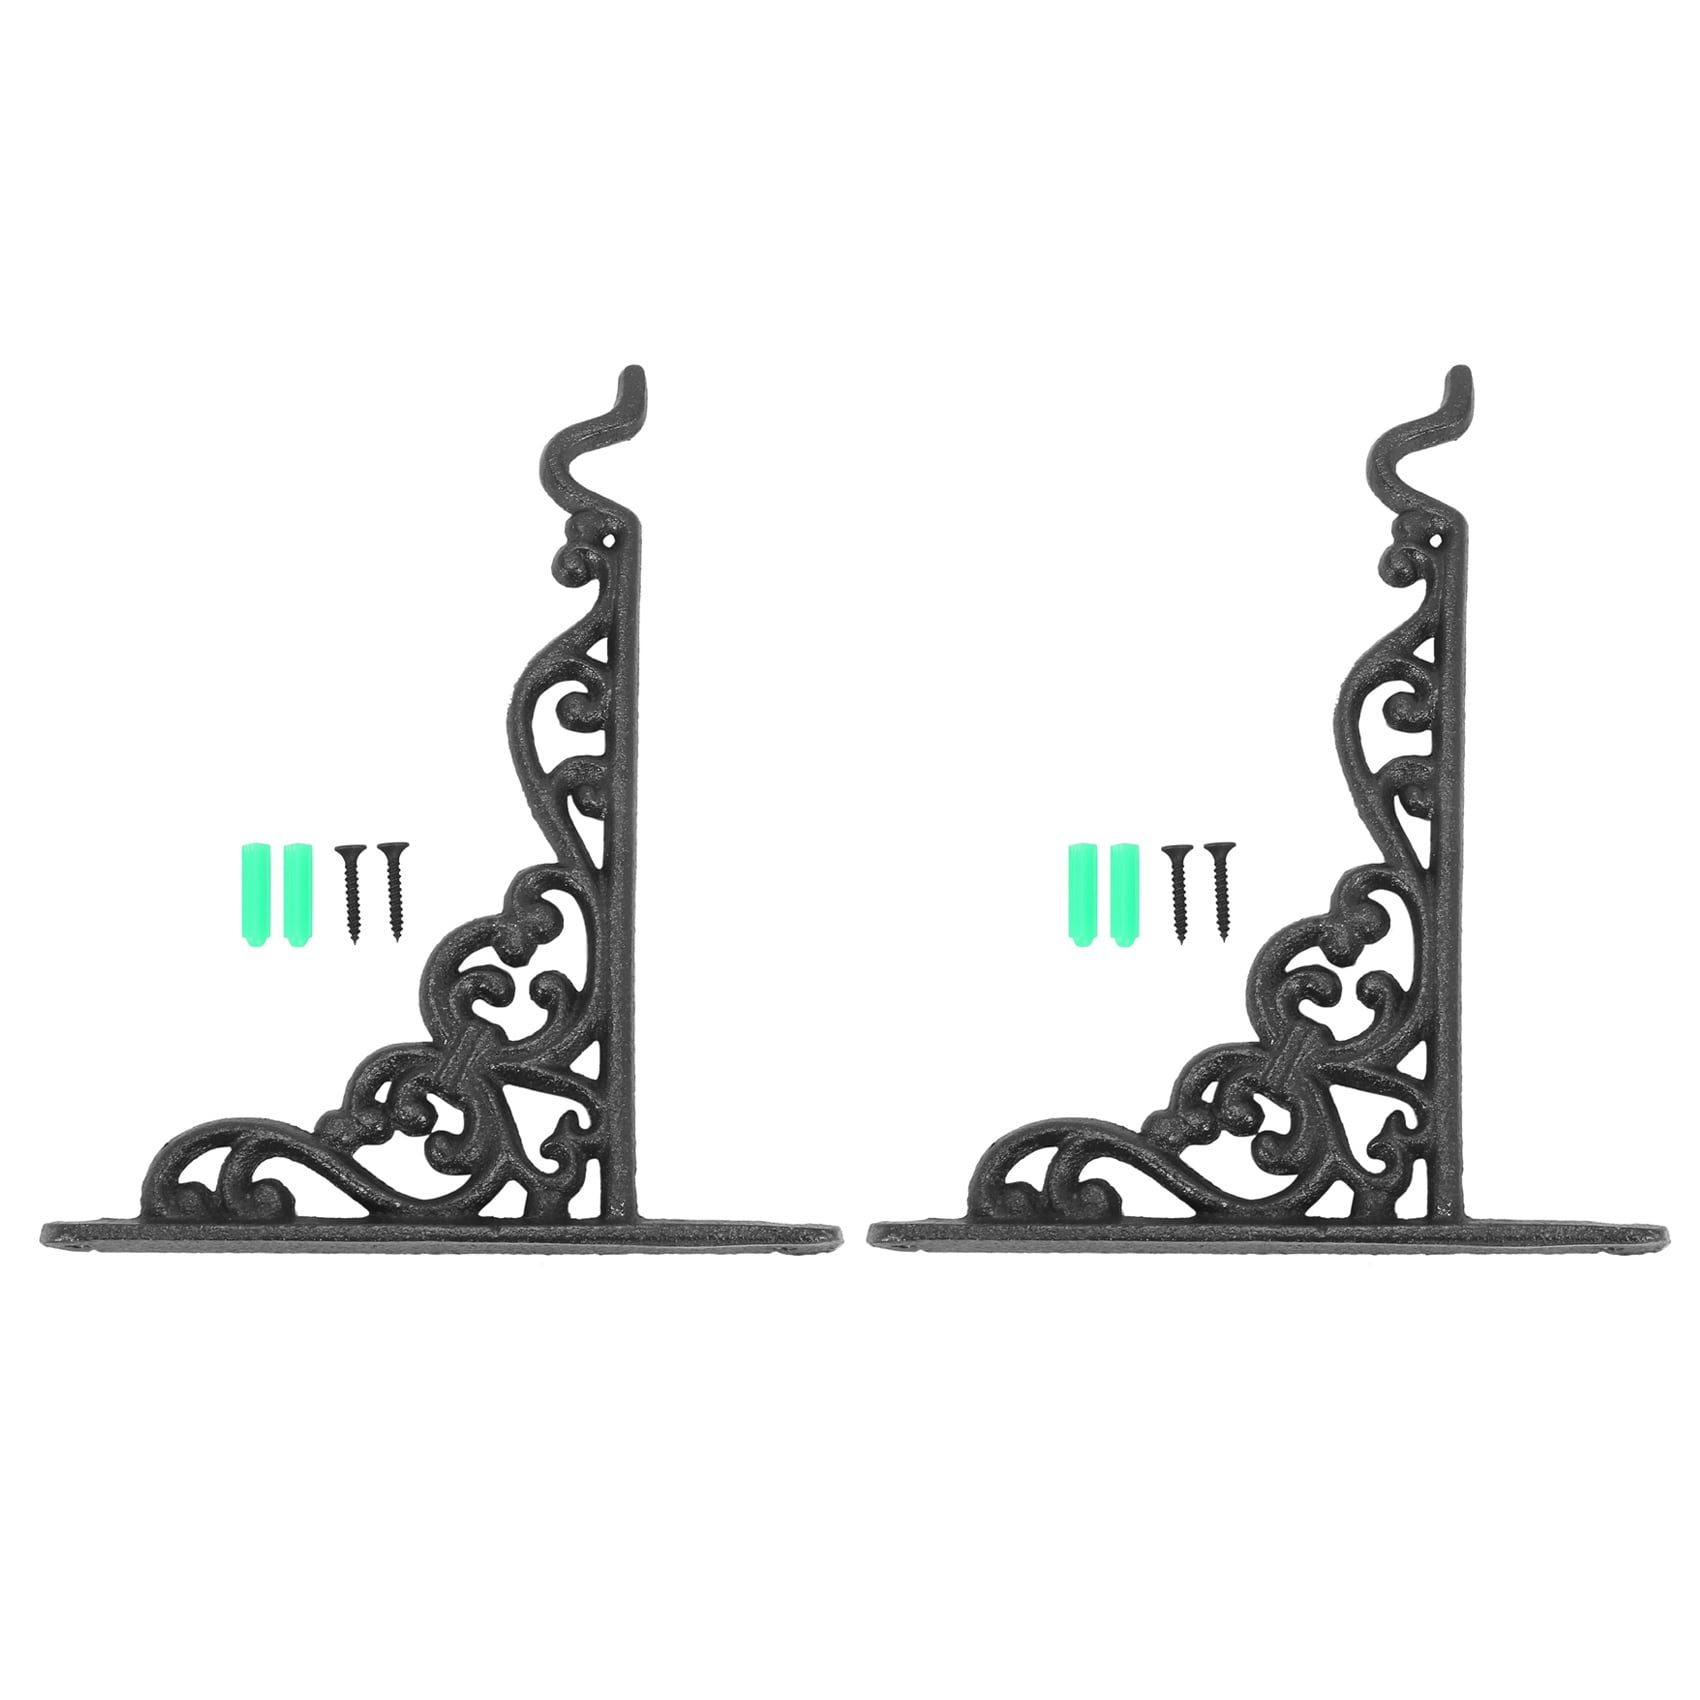 Wrought Iron Garden Lead Apron Hanger With Expansion Screw For Flower Pots  And Baskets Cast Iron Wall Bracket From Liliooo, $19.45